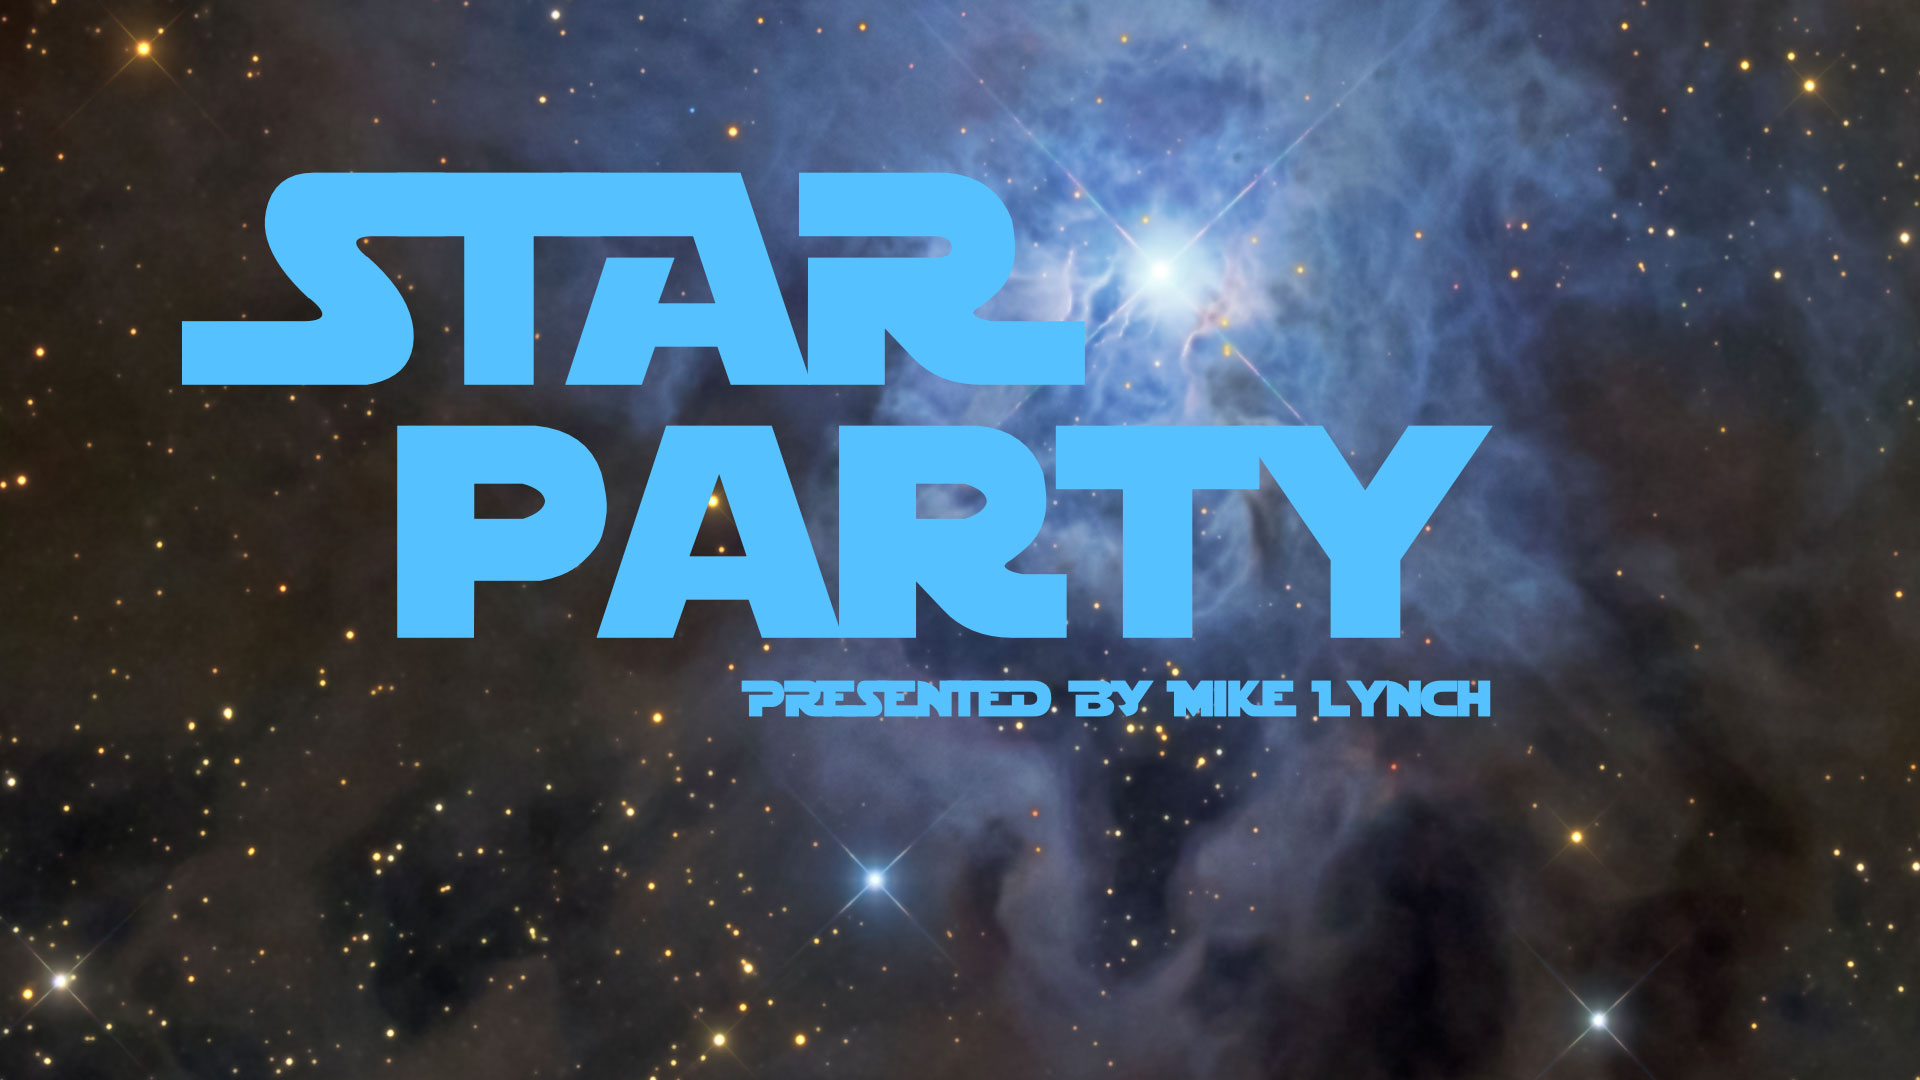 Event Promo Photo For Star Party with Mike Lynch